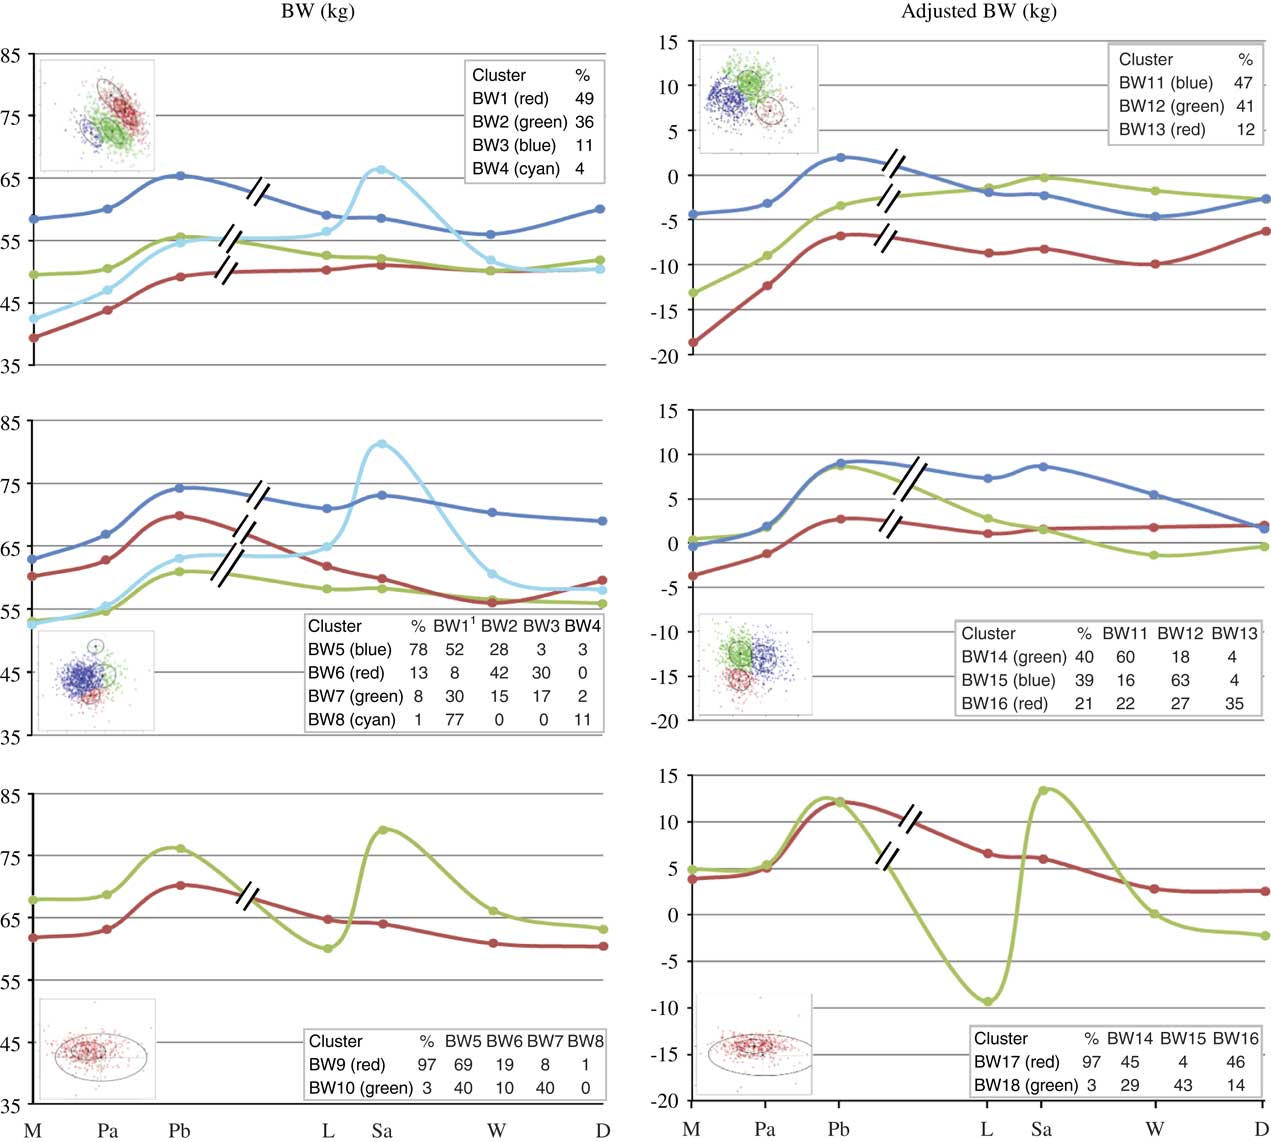 Intra Flock Variability In The Body Reserve Dynamics Of Meat Sheep By Analyzing Bw And Body Condition Score Variations Over Multiple Production Cycles Animal Cambridge Core